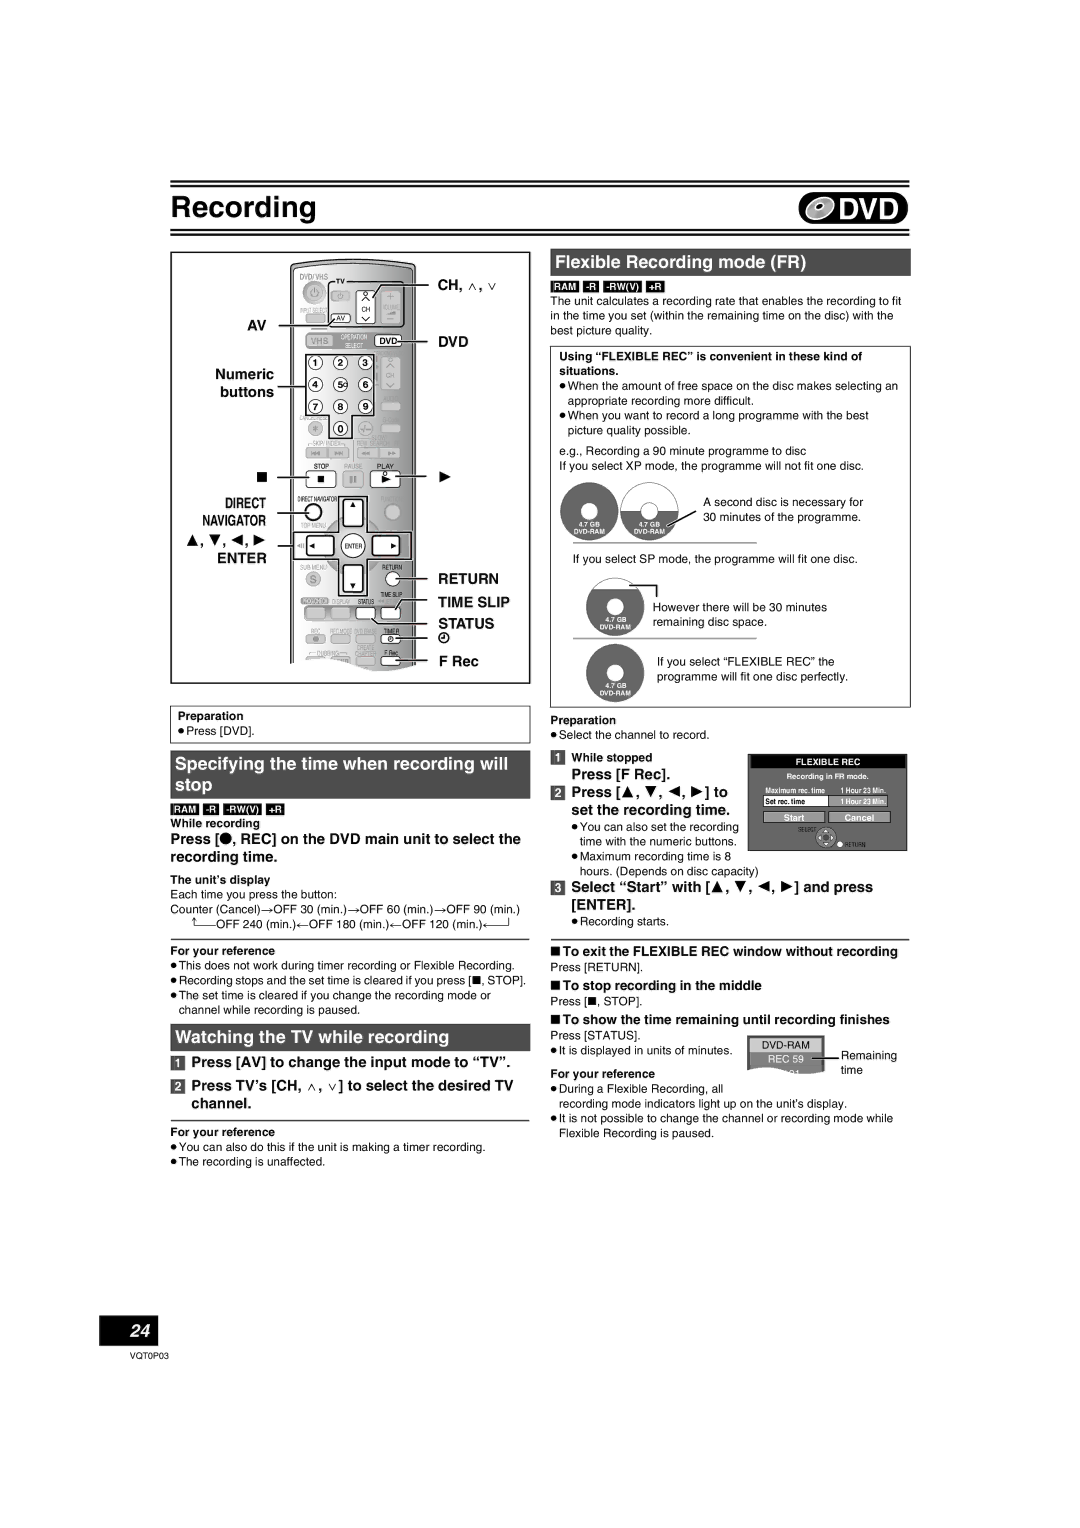 Panasonic DMR-ES30V operating instructions Specifying the time when recording will stop, Watching the TV while recording 